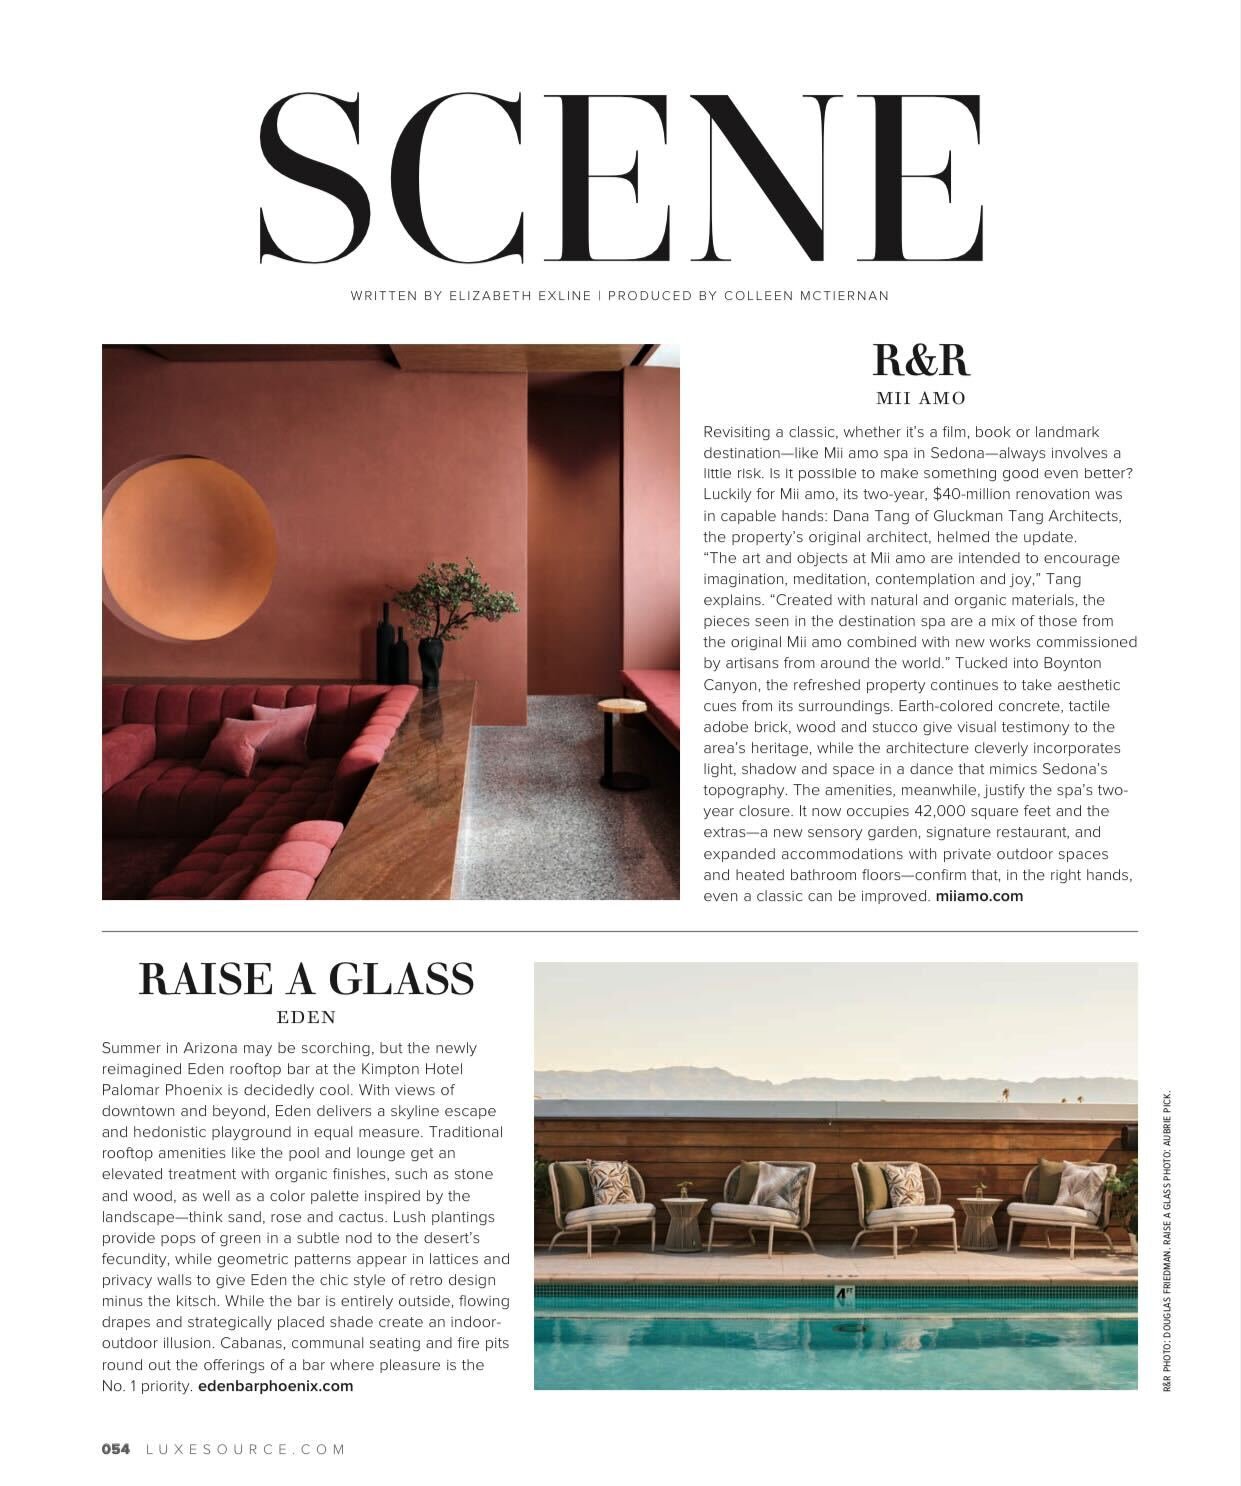  Snippet from “Luxe Interiors + Design” magazine featuring Arizona destination’s Mii Amo spa and Eden rooftop bar.  